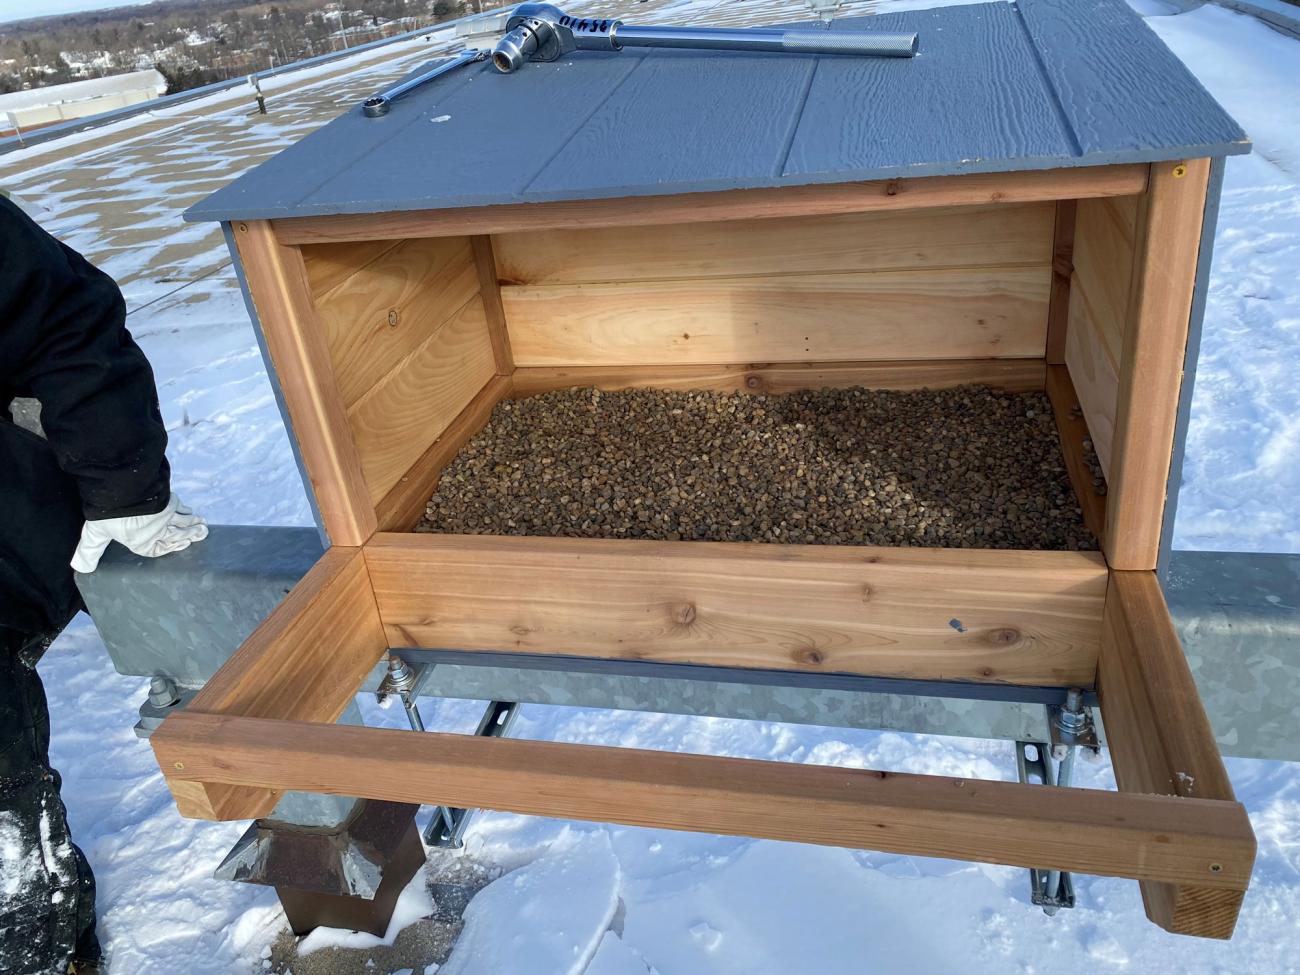 A rectangular pine box with a few inches of pea gravel on the bottom.